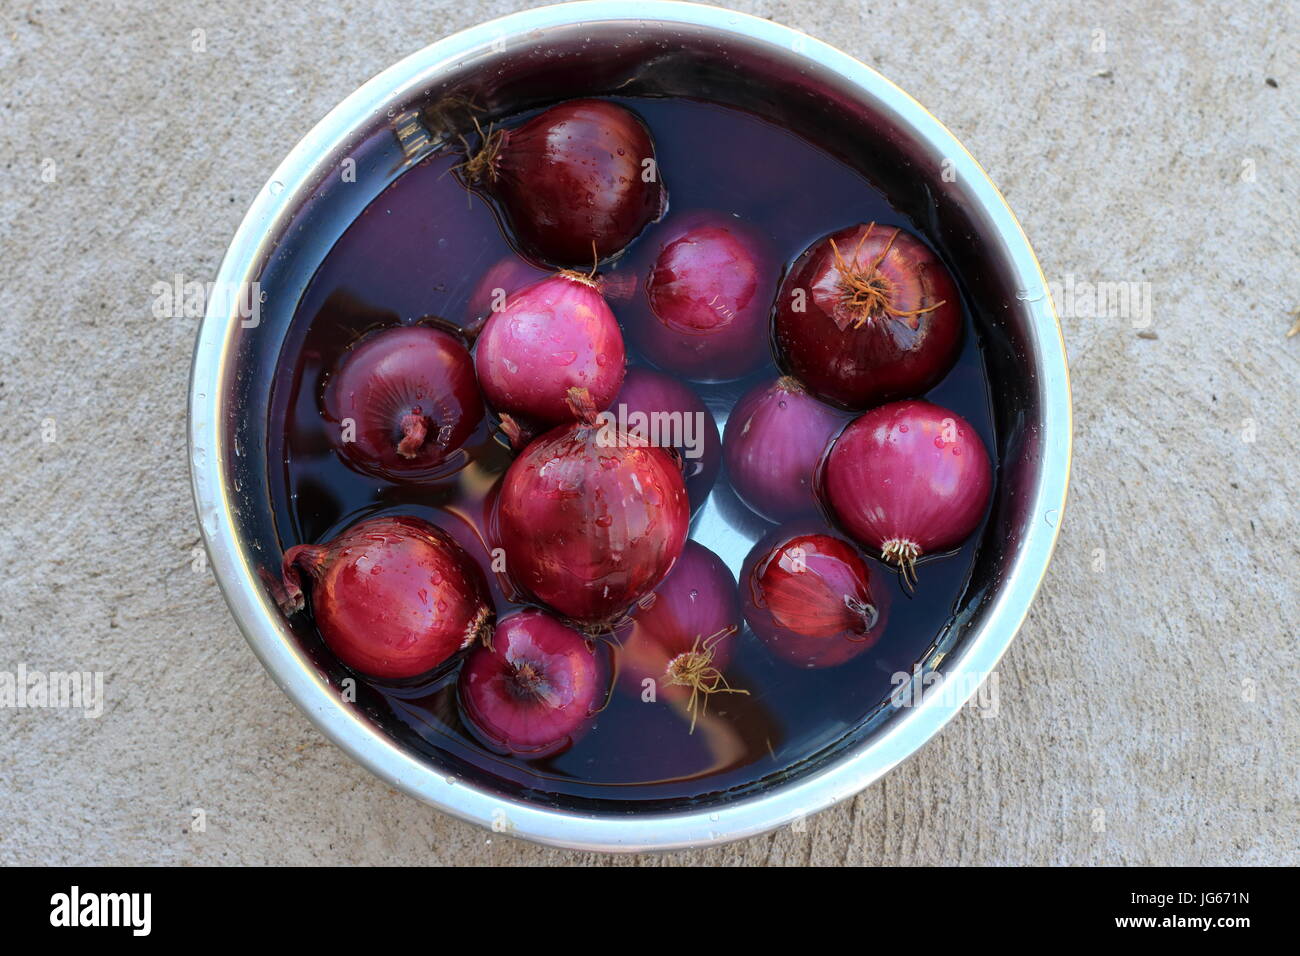 Red onions soaking in plain water Stock Photo